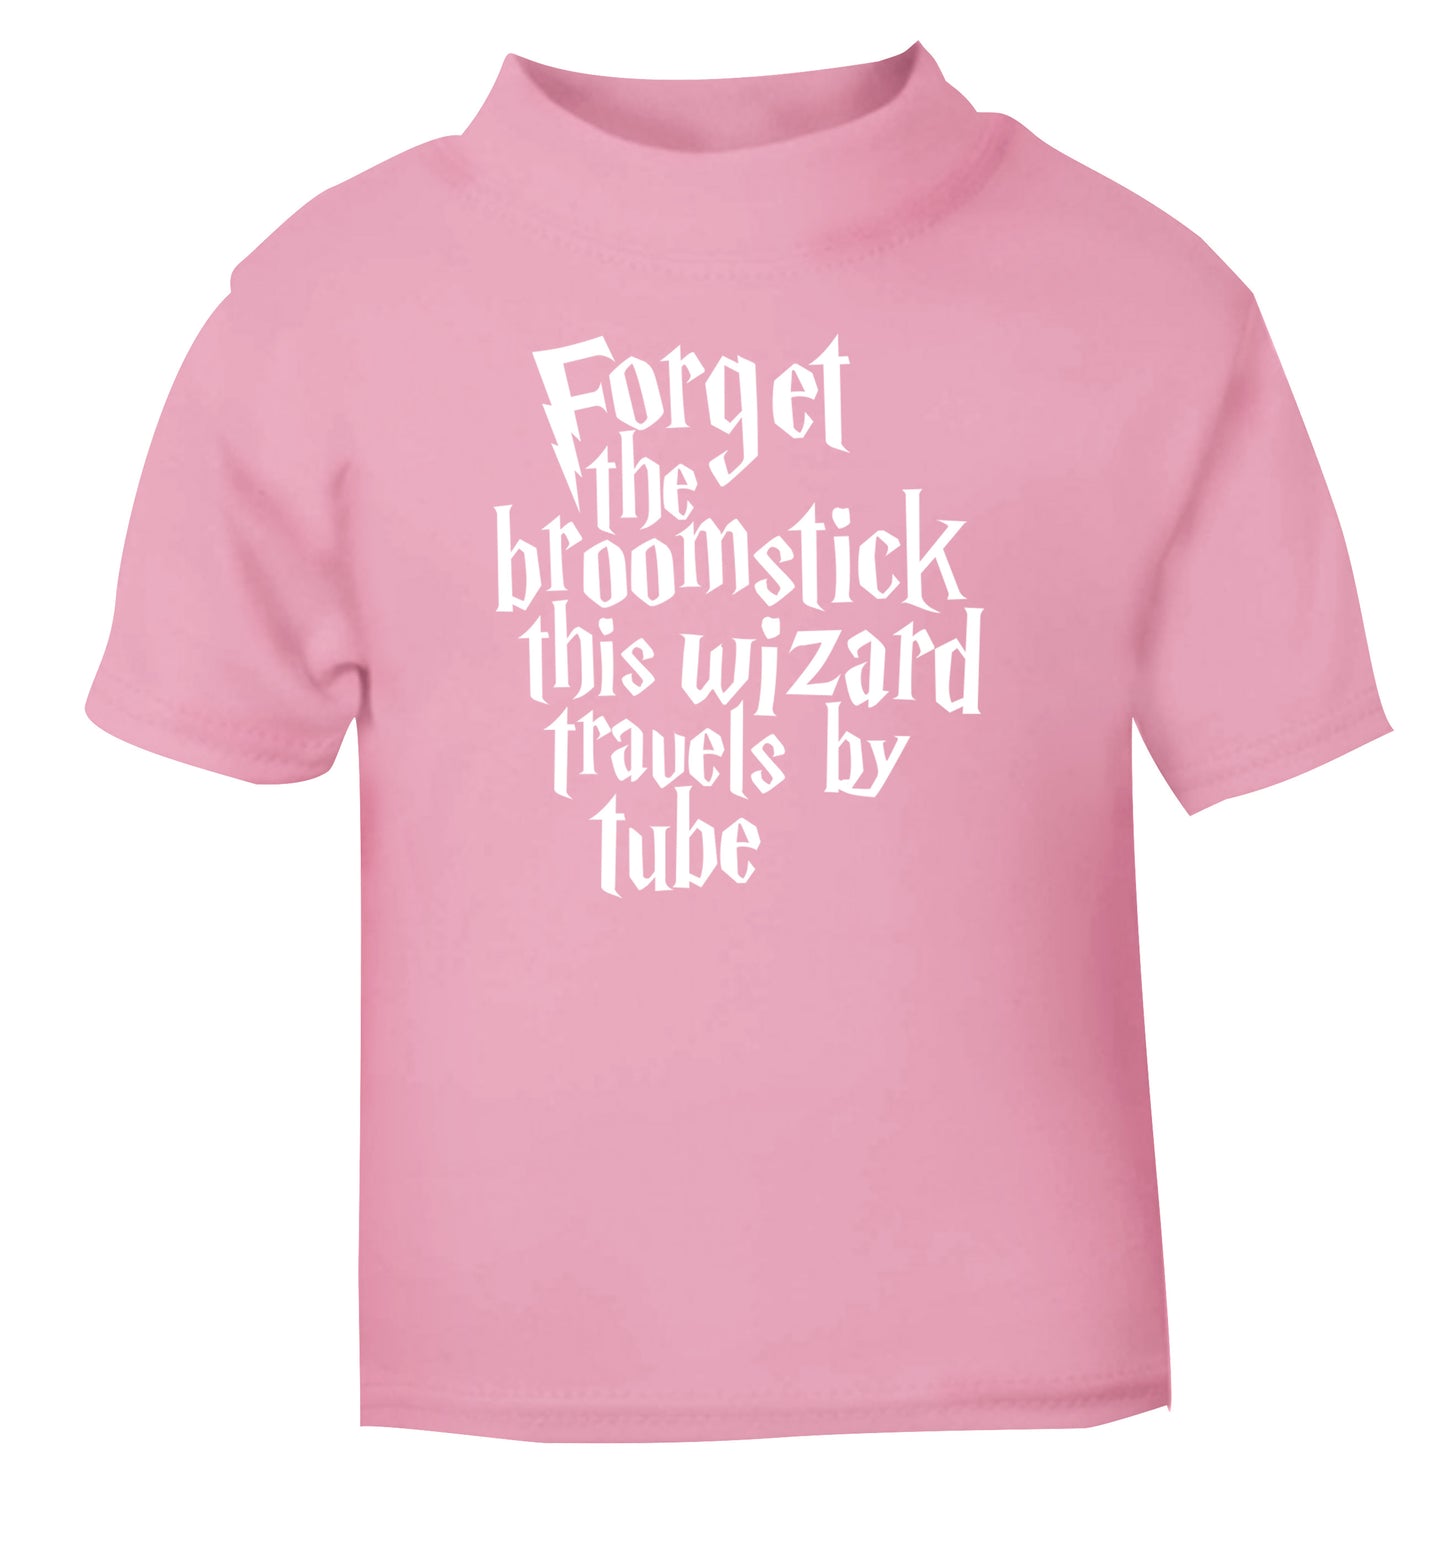 Forget the broomstick this wizard travels by tube light pink Baby Toddler Tshirt 2 Years